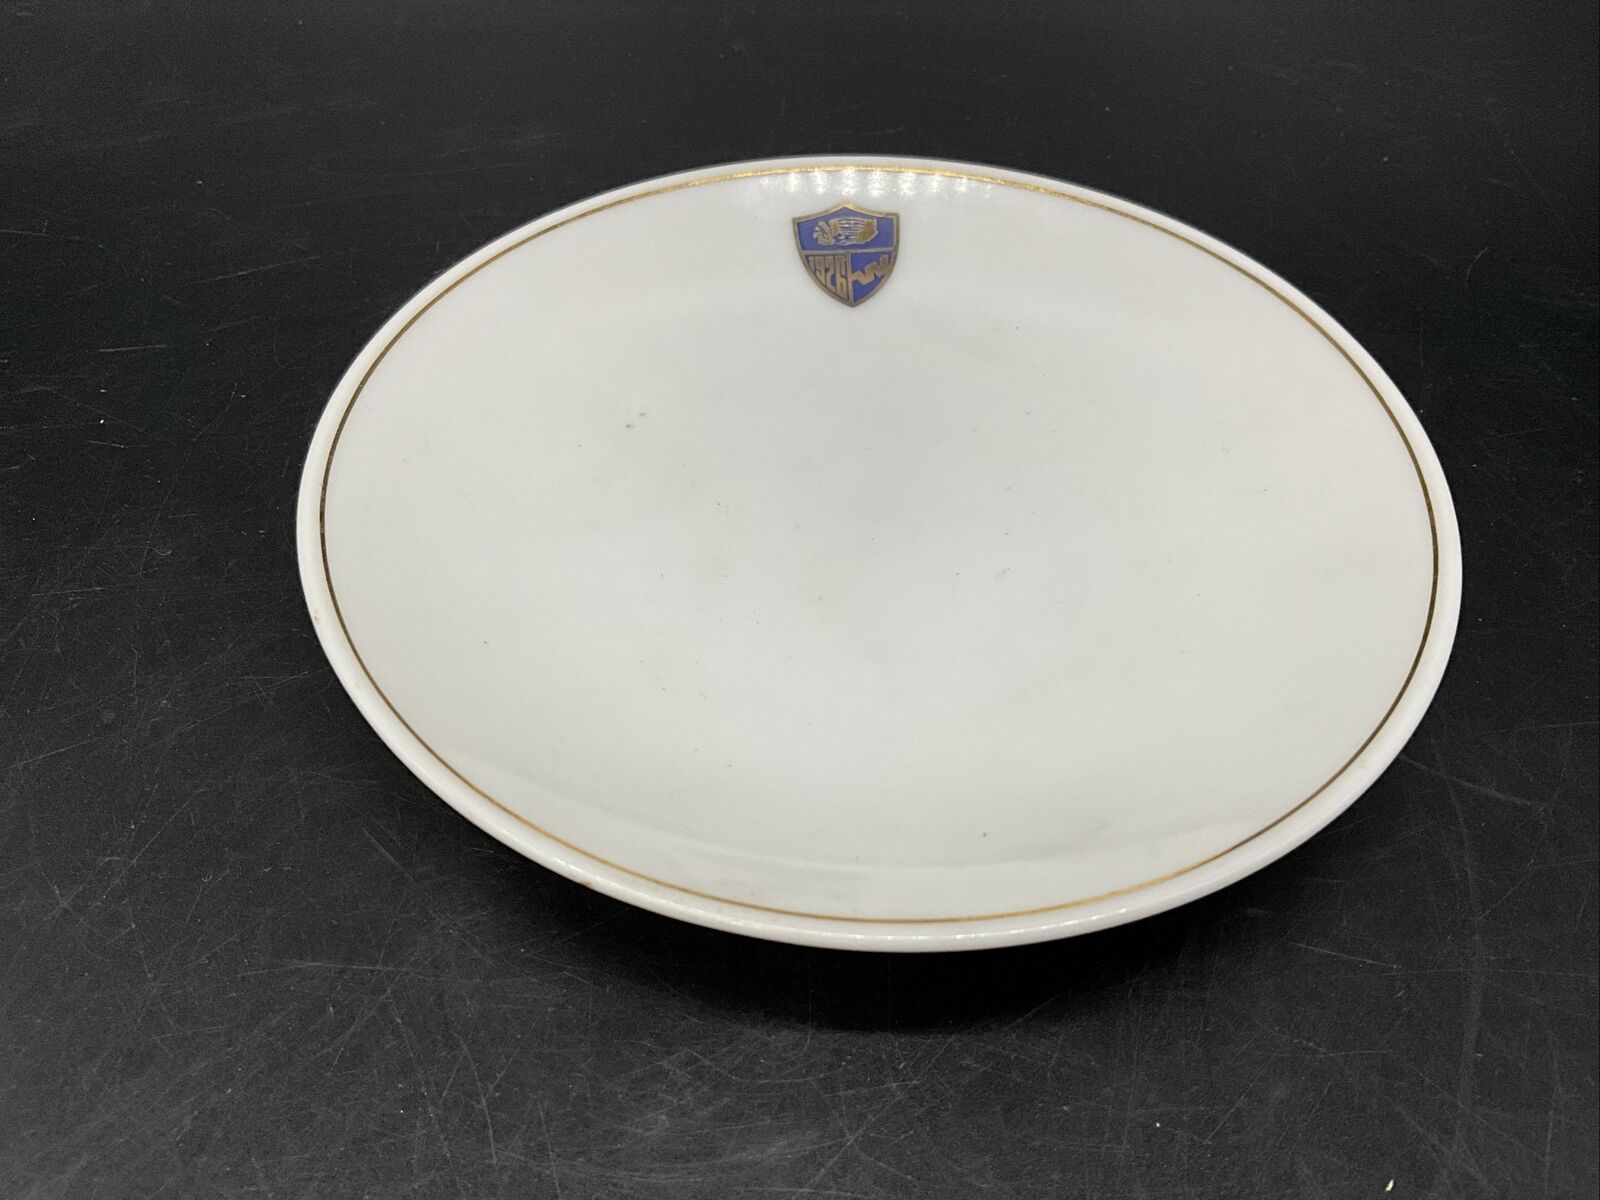 Western Airlines Bread Plate- 60th Anniversary Shield - 1986 by ABCO